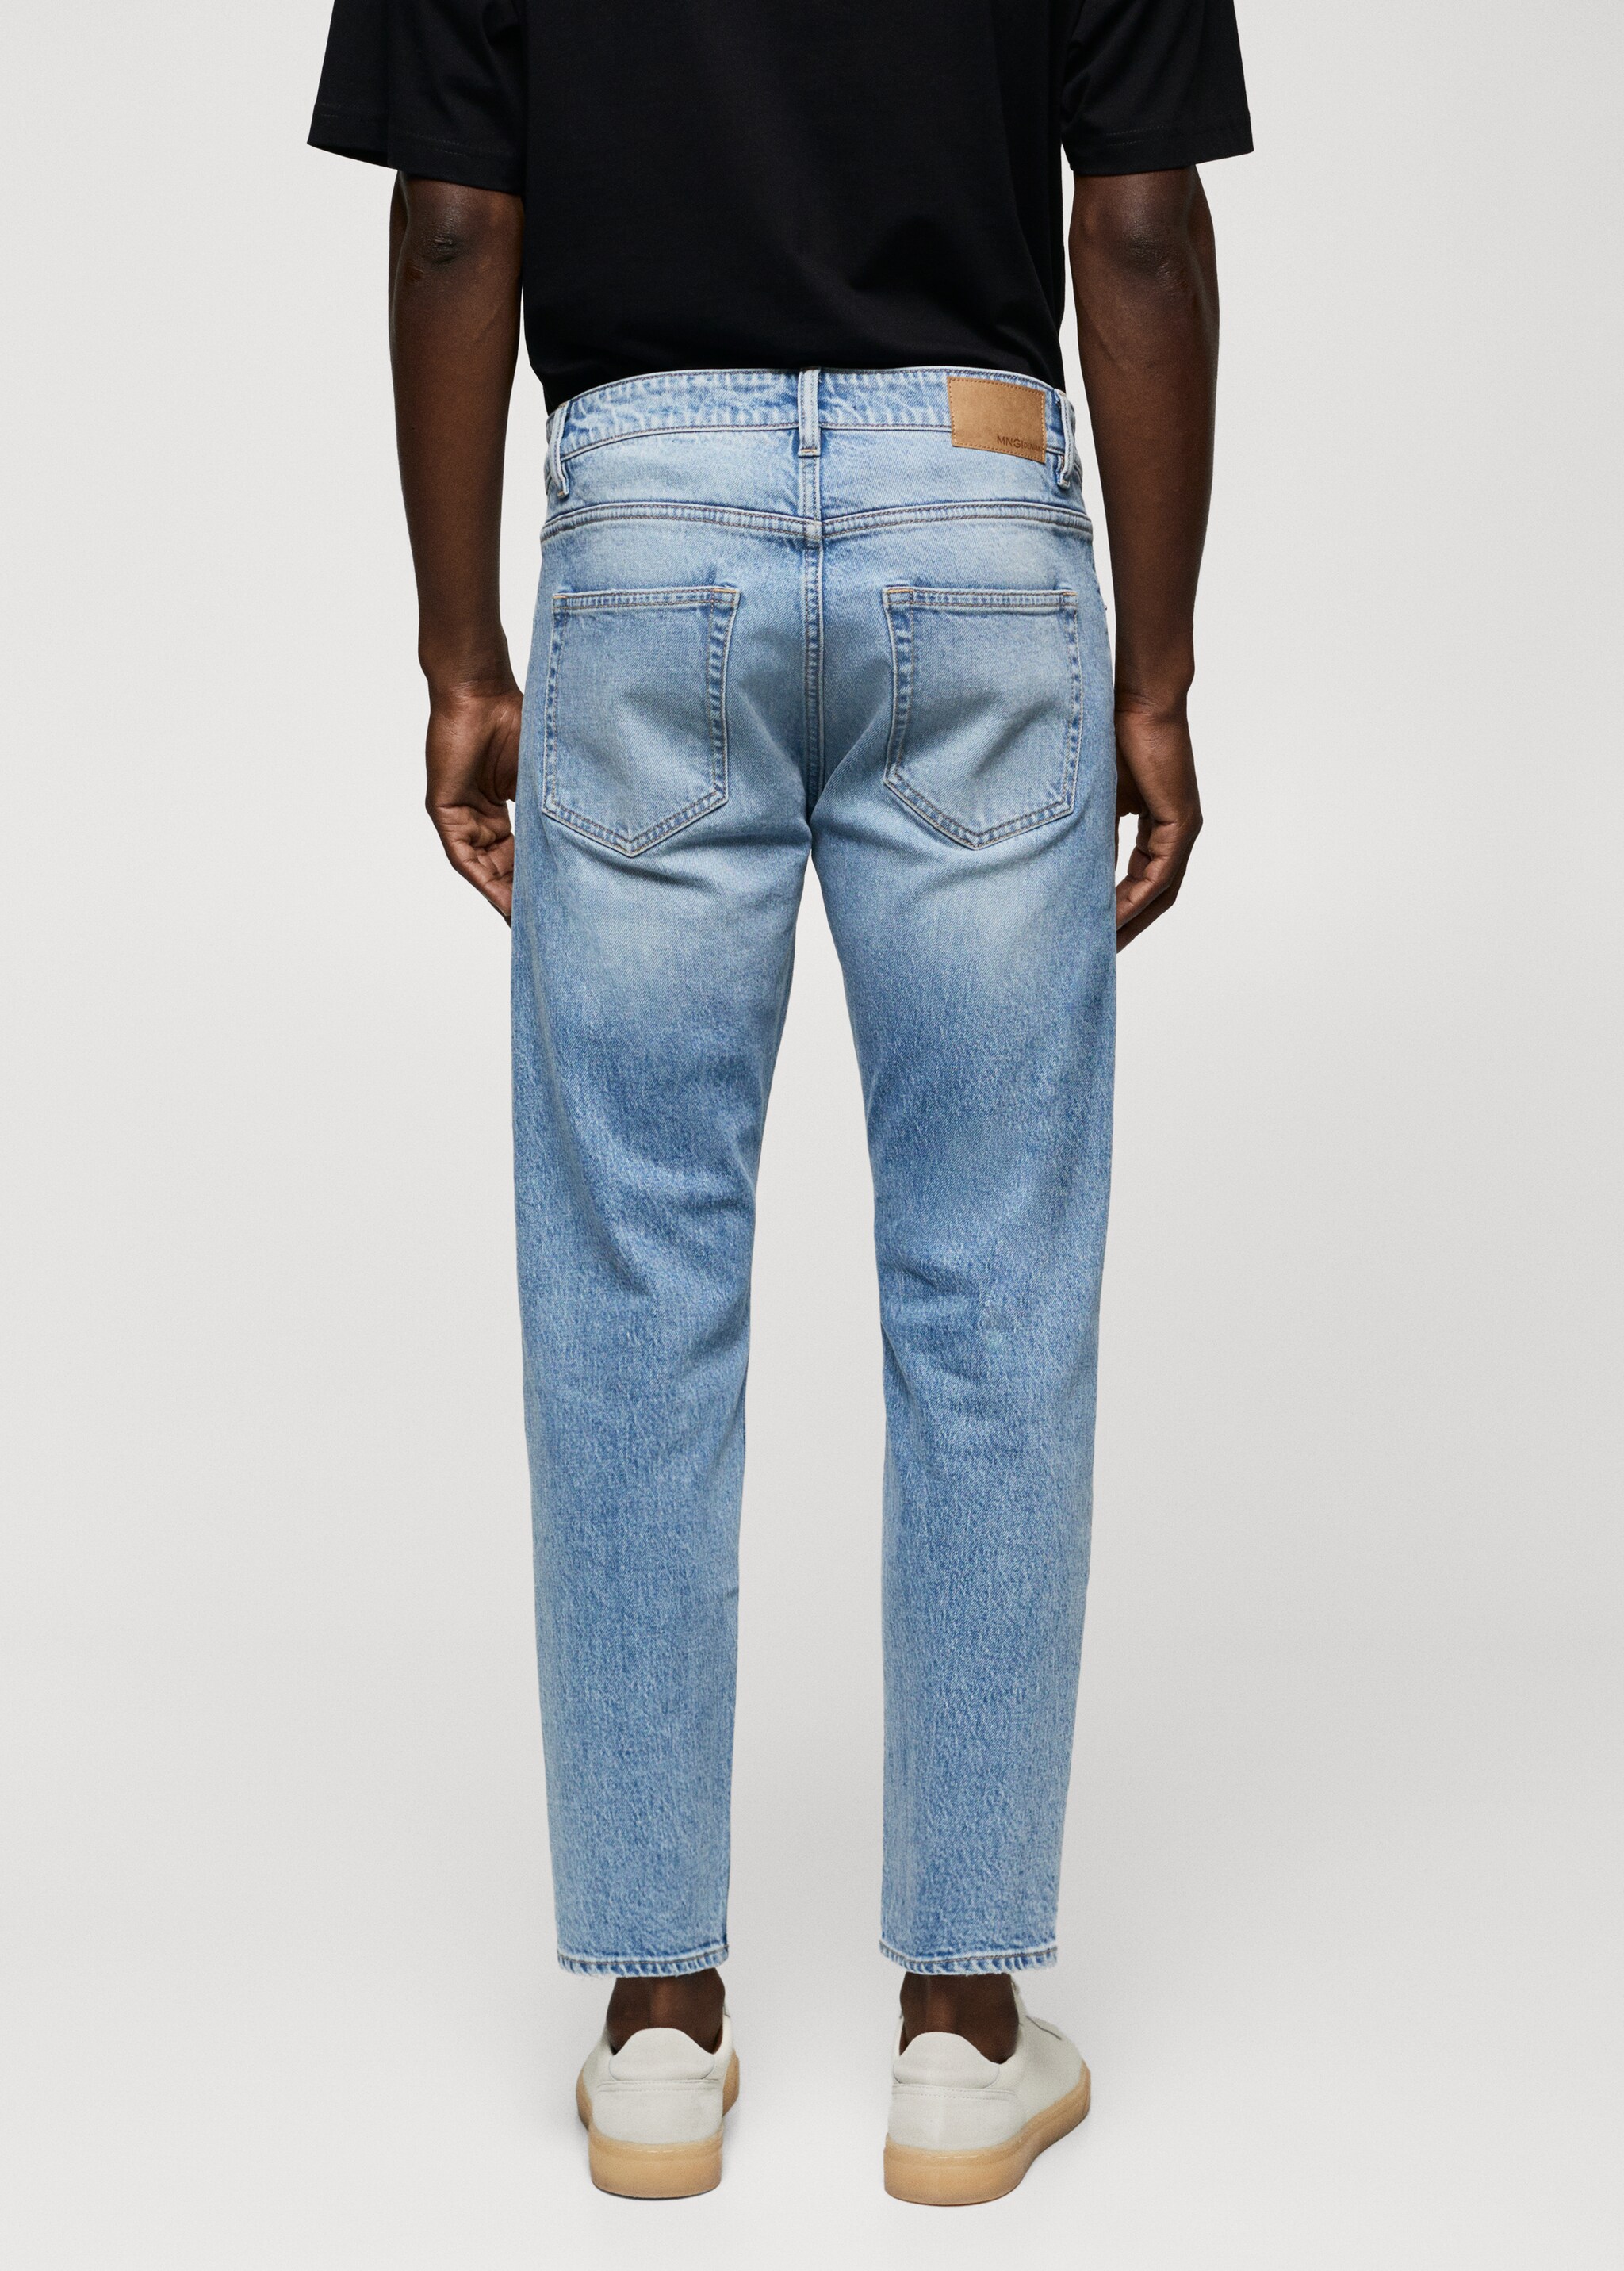 Ben tapered cropped jeans - Reverse of the article